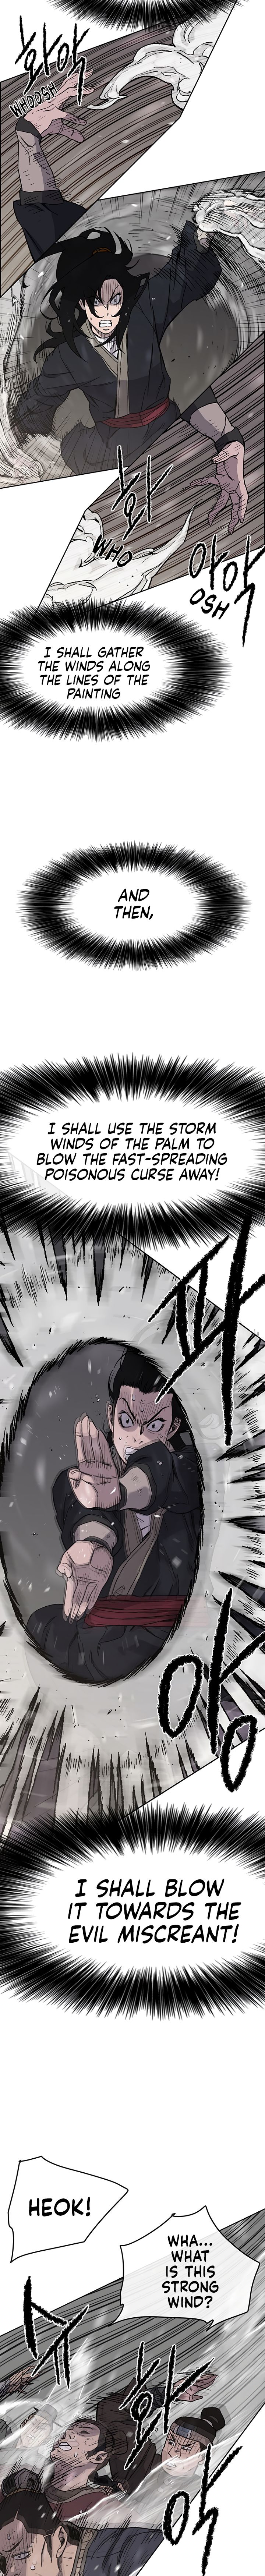 The Undefeatable Swordsman - Chapter 21 Page 5